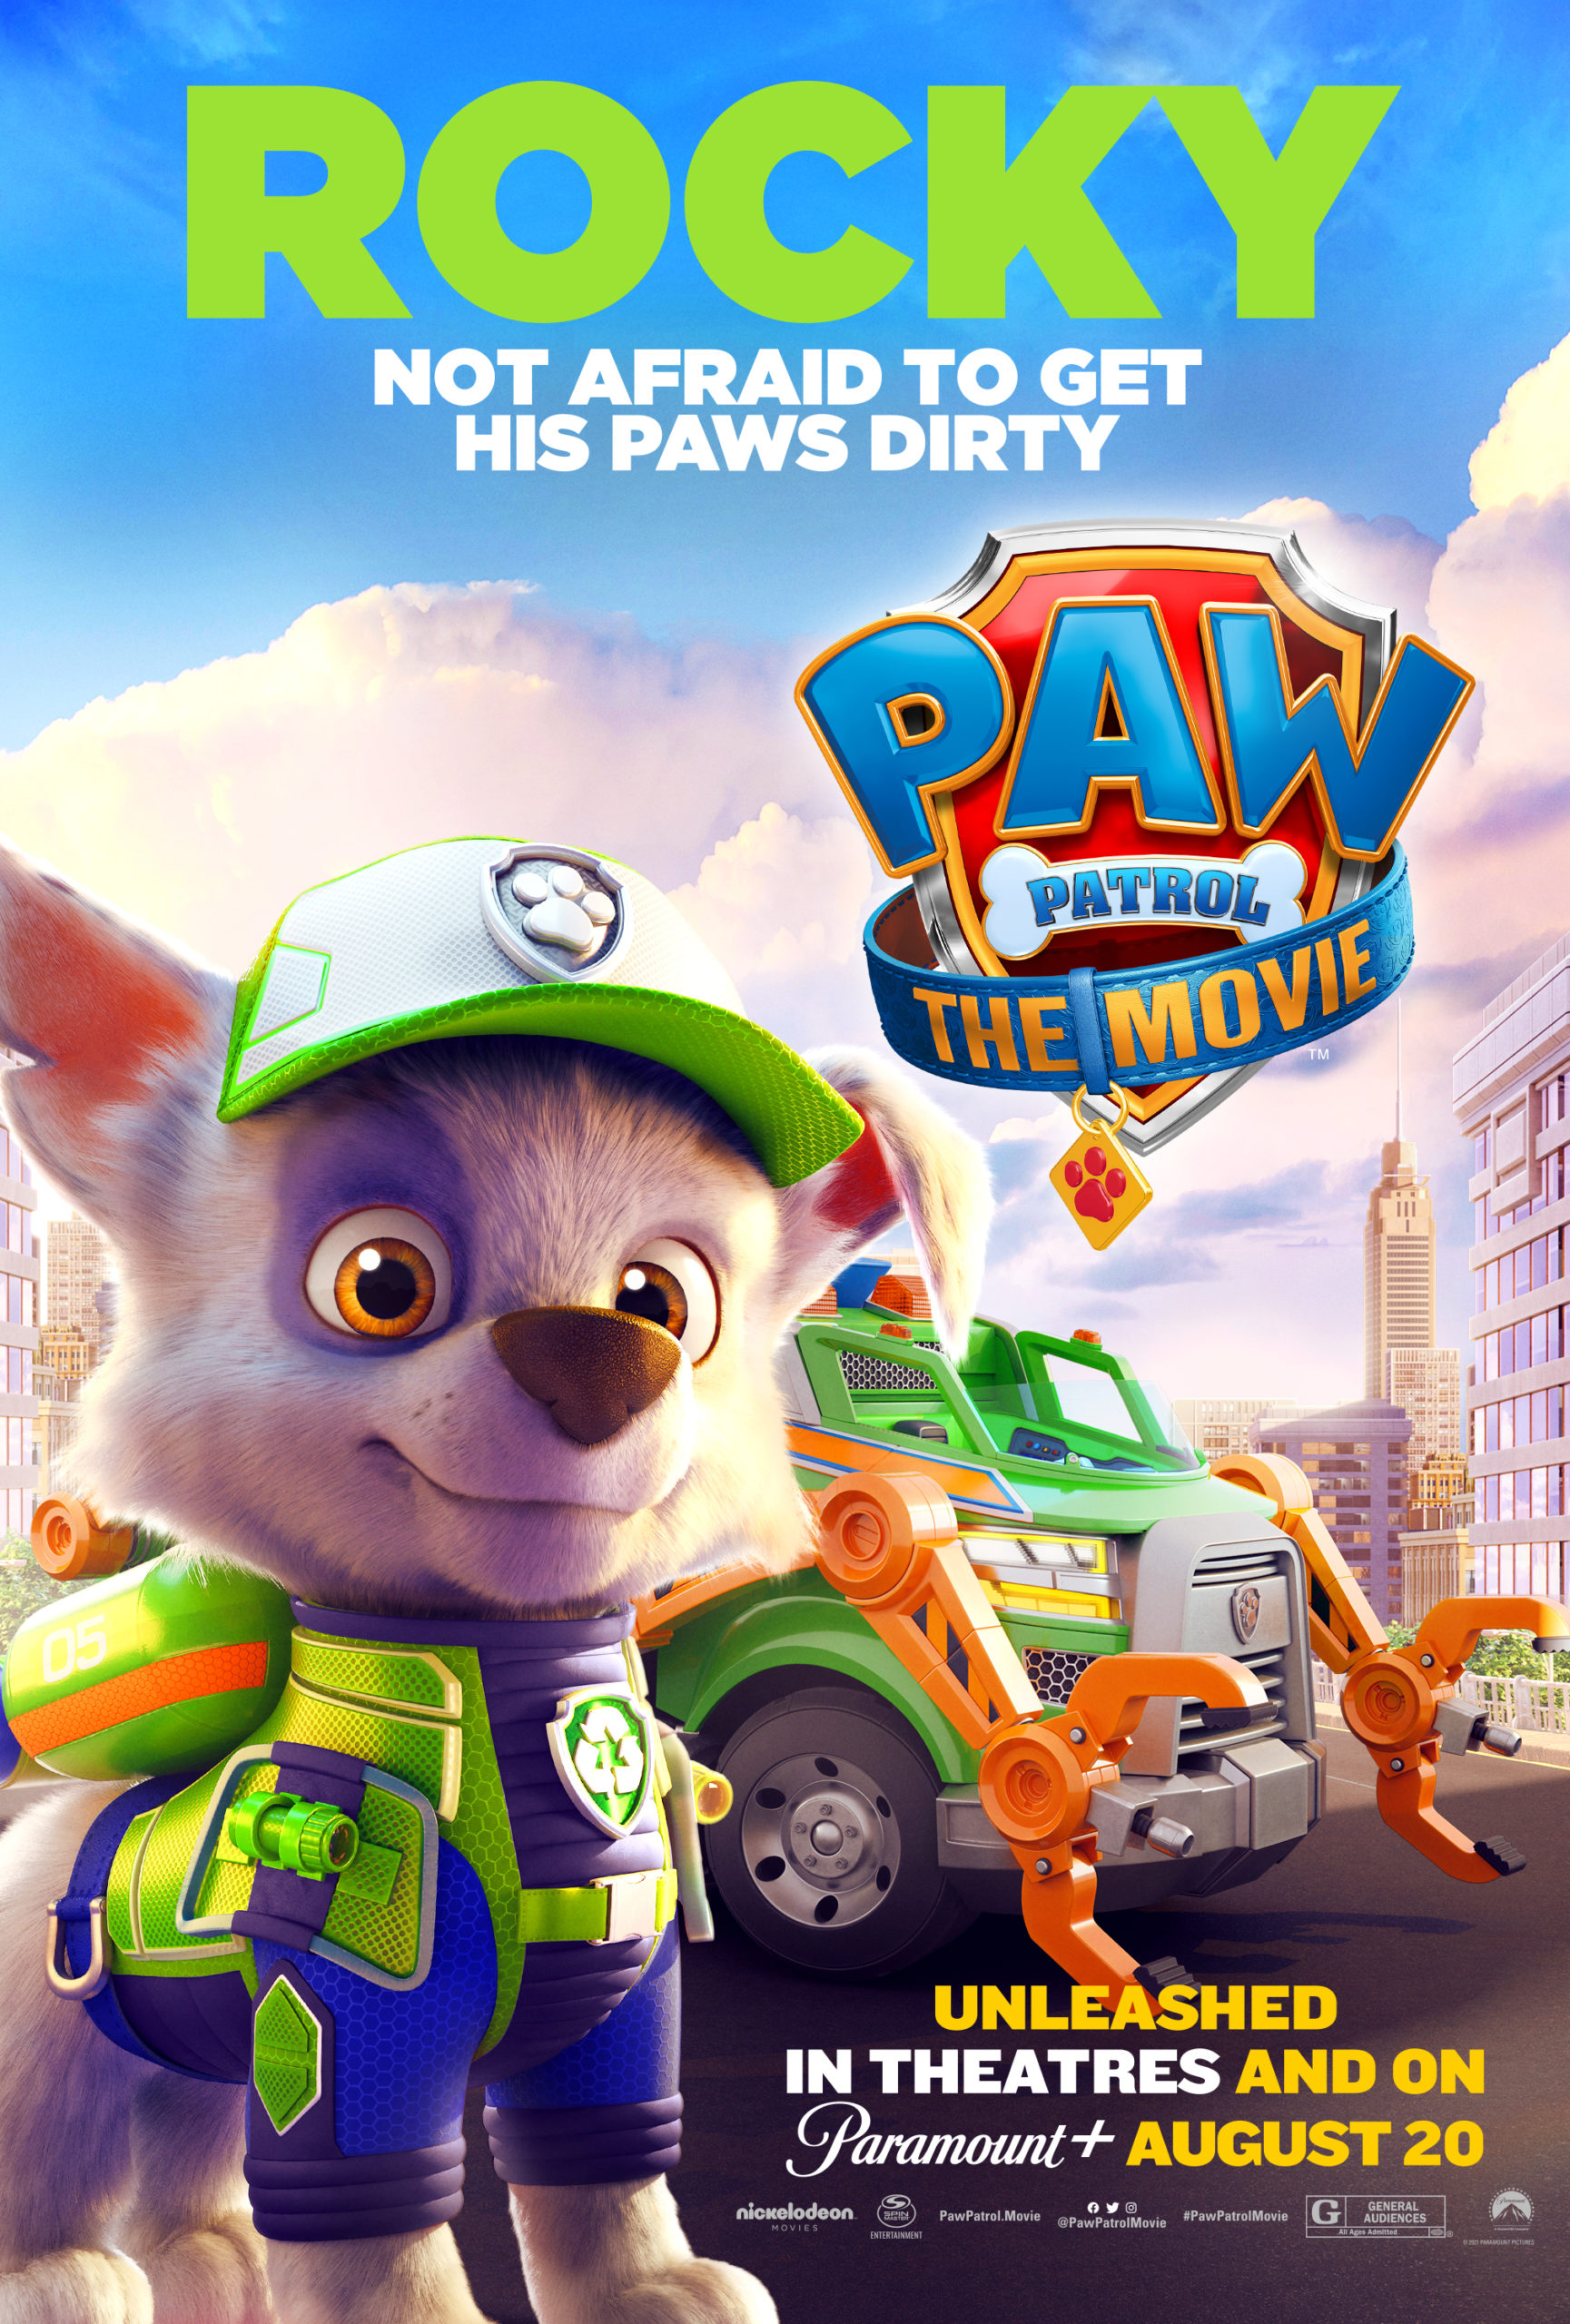 Paw Patrol The Movie Cast Featurette And Character Posters! LRM